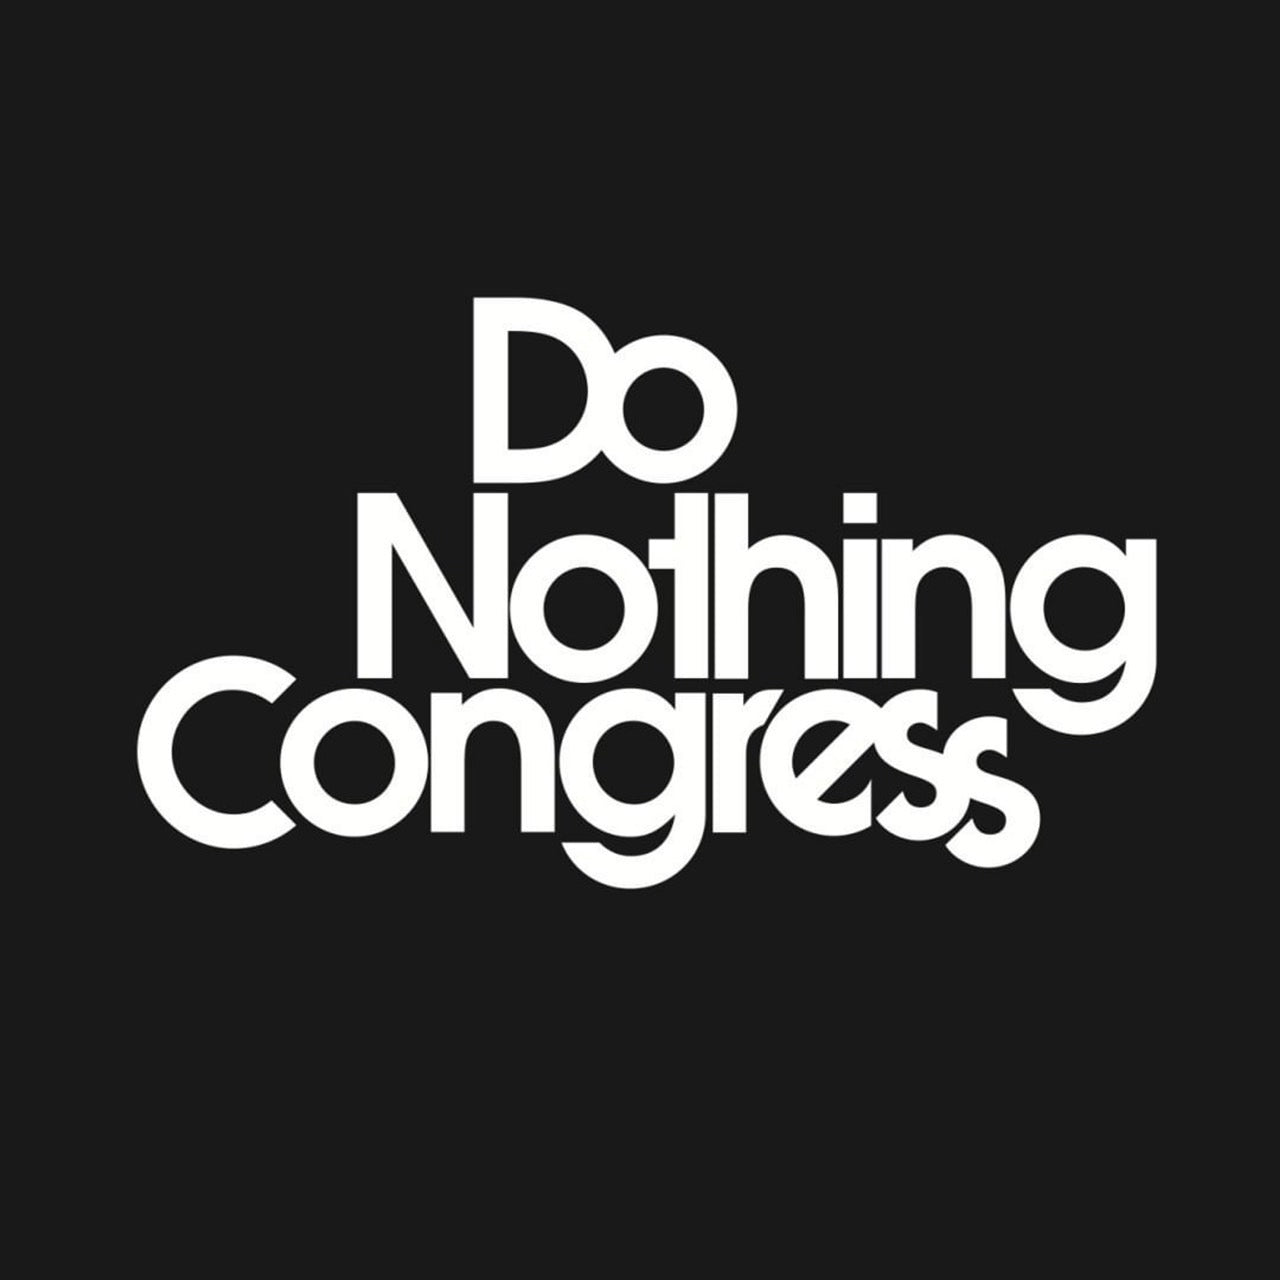 Do Nothing Congress T-SHIRTS "A Cup of Tea" / Do Nothing Congress